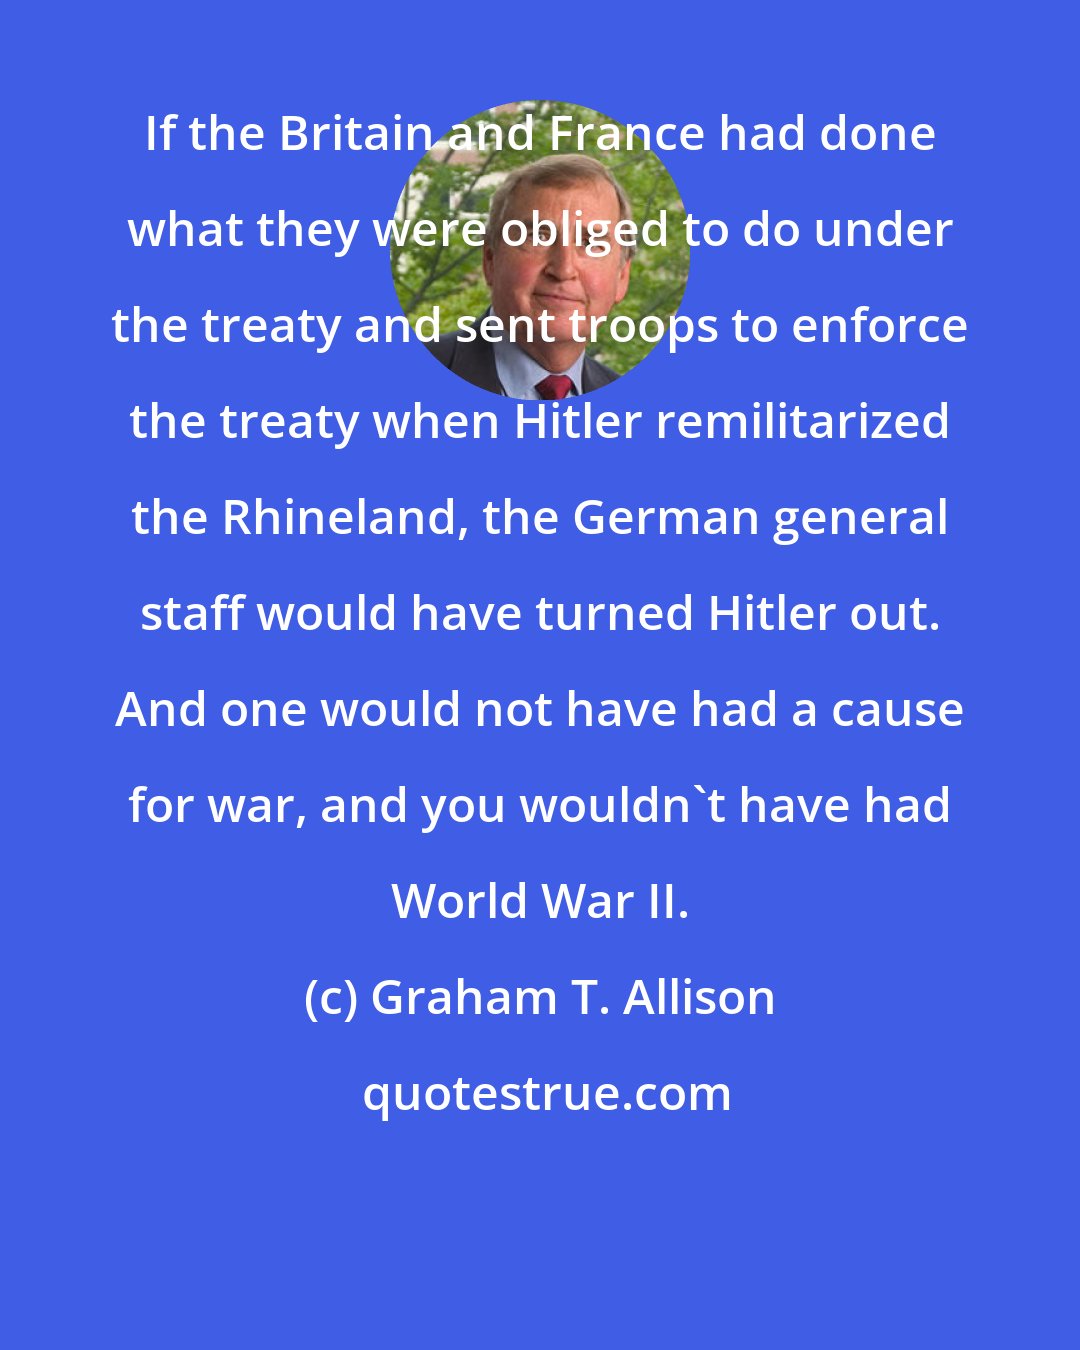 Graham T. Allison: If the Britain and France had done what they were obliged to do under the treaty and sent troops to enforce the treaty when Hitler remilitarized the Rhineland, the German general staff would have turned Hitler out. And one would not have had a cause for war, and you wouldn't have had World War II.